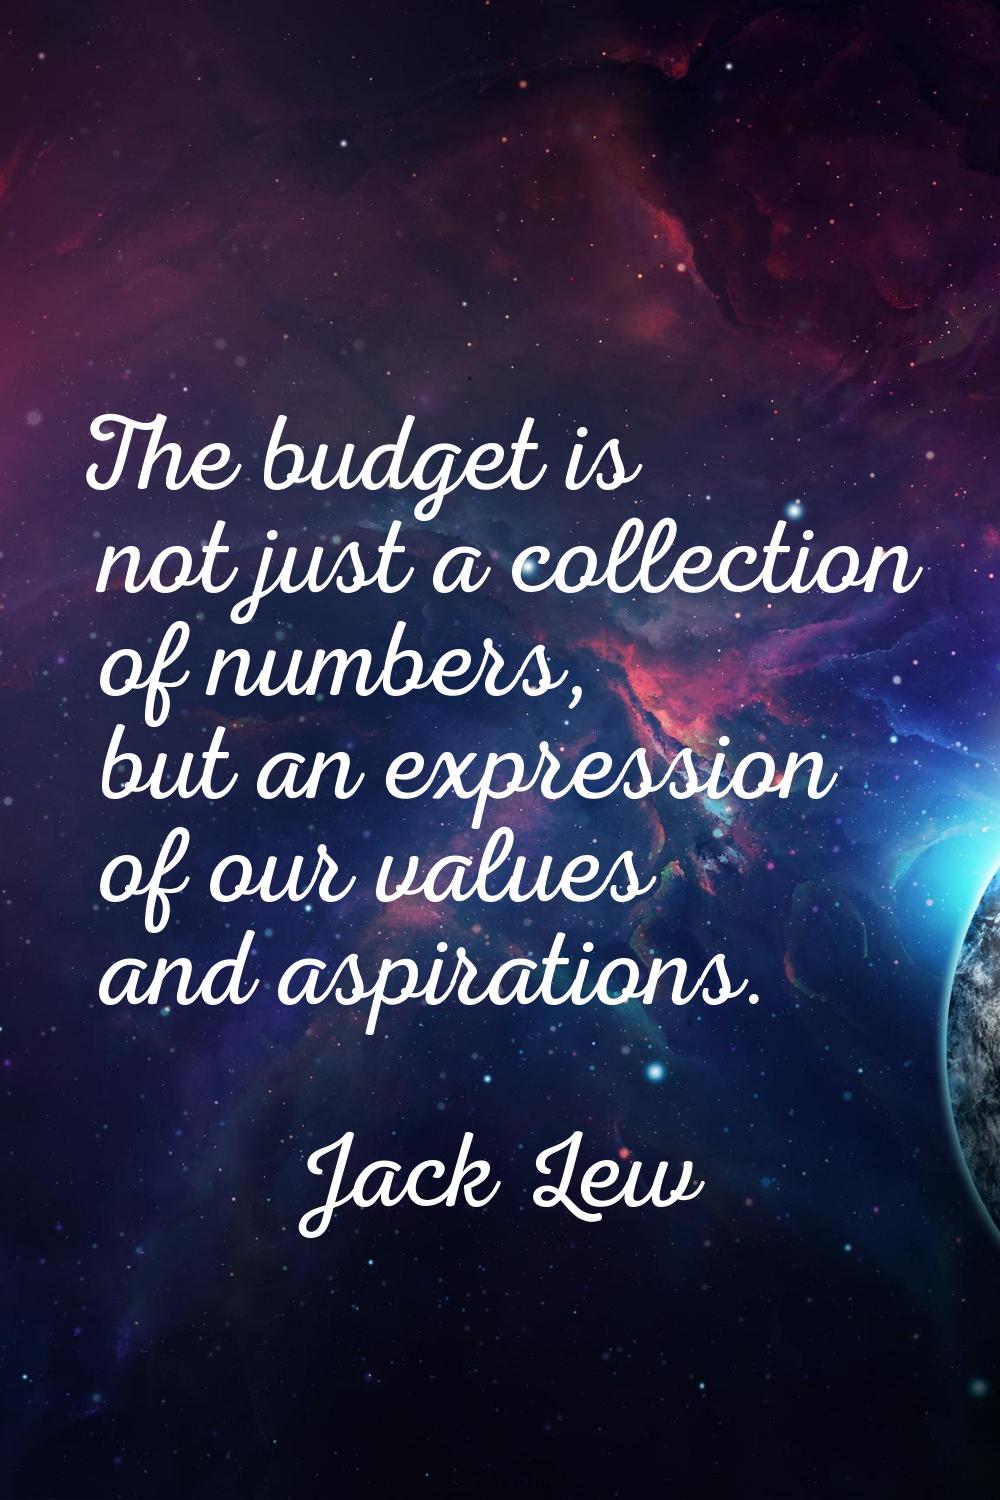 The budget is not just a collection of numbers, but an expression of our values and aspirations.